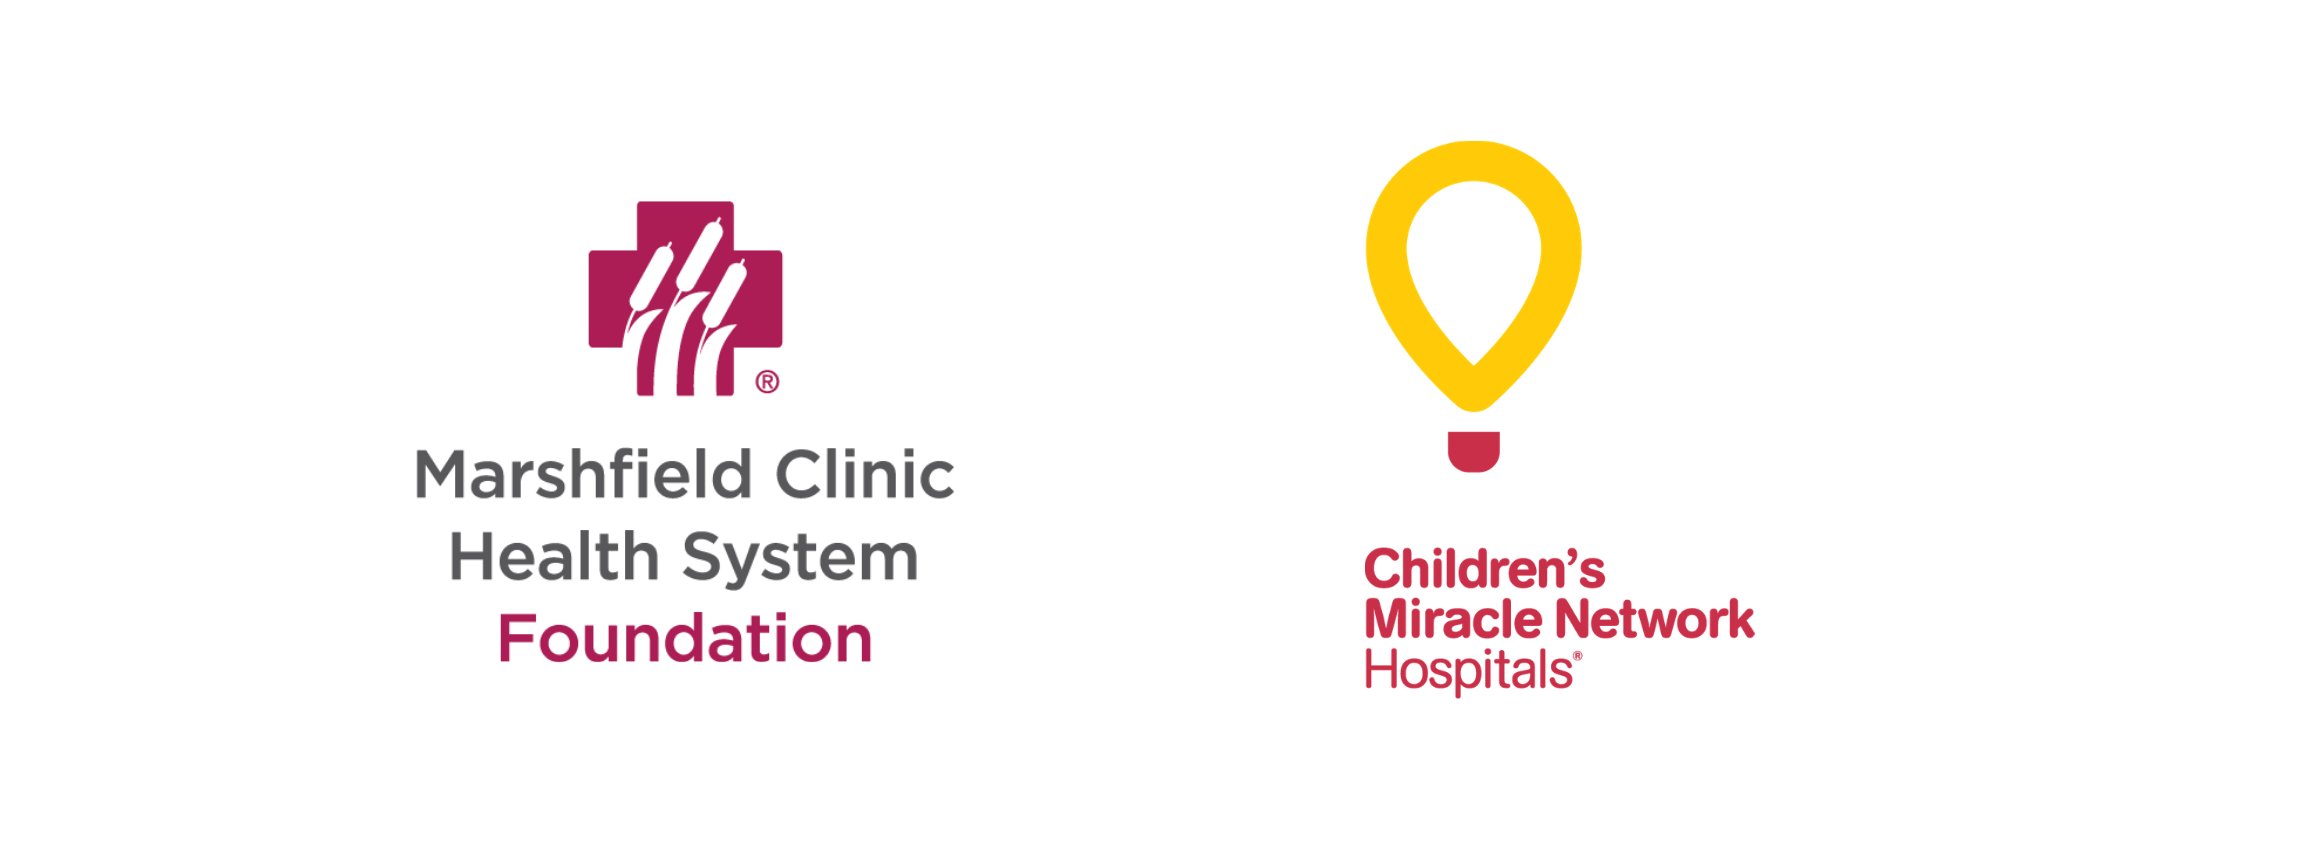 MCHS Foundation and CMNH logos